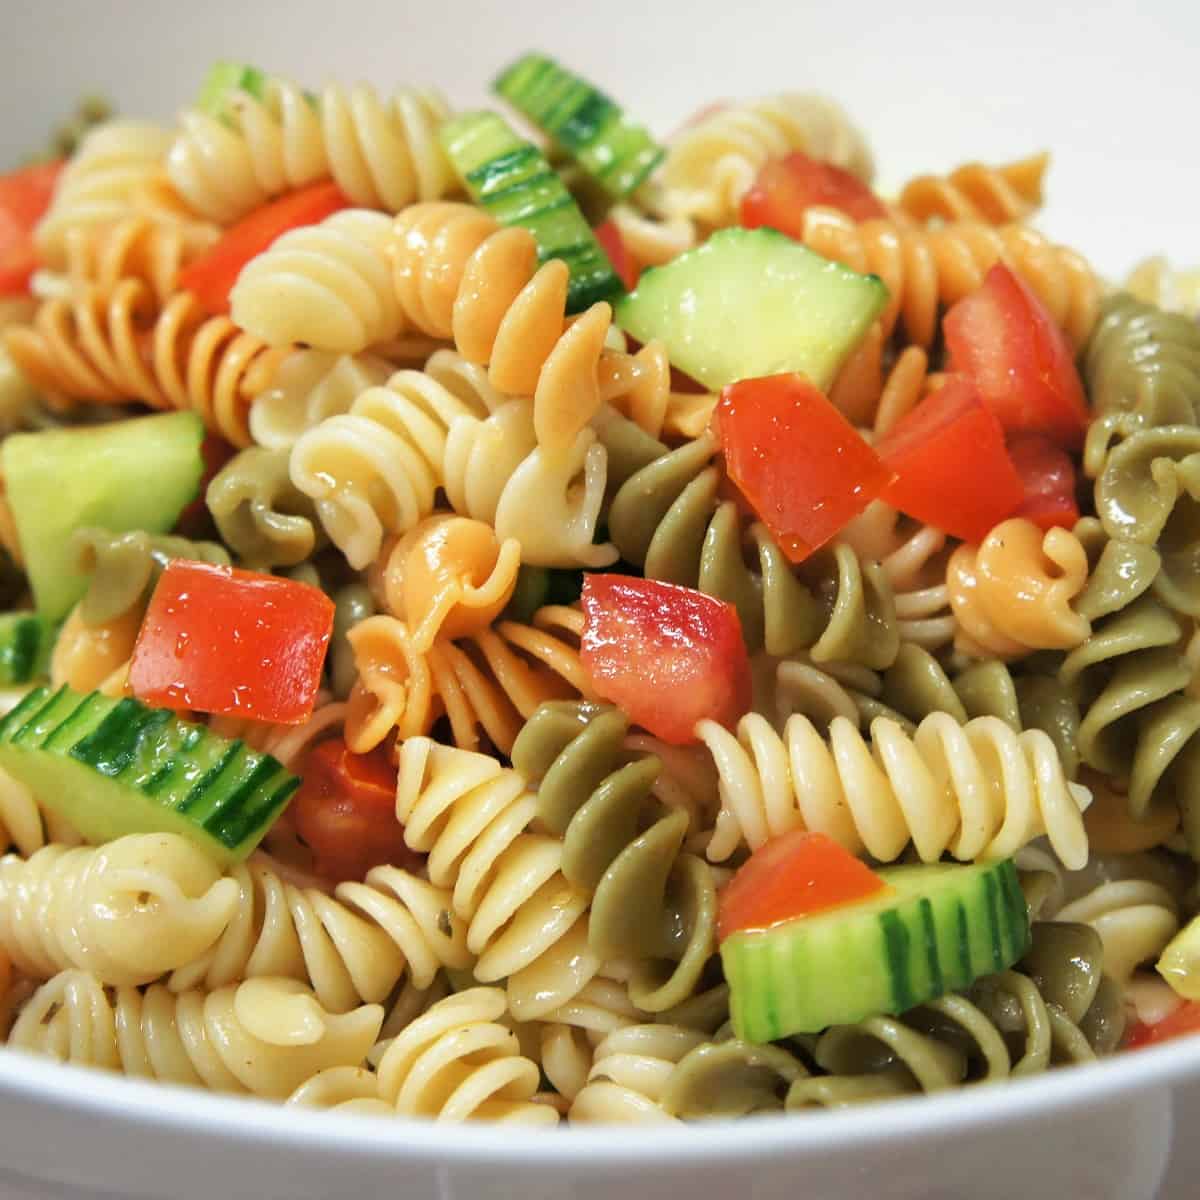 A close up image of the garden pasta salad in a white bowl.